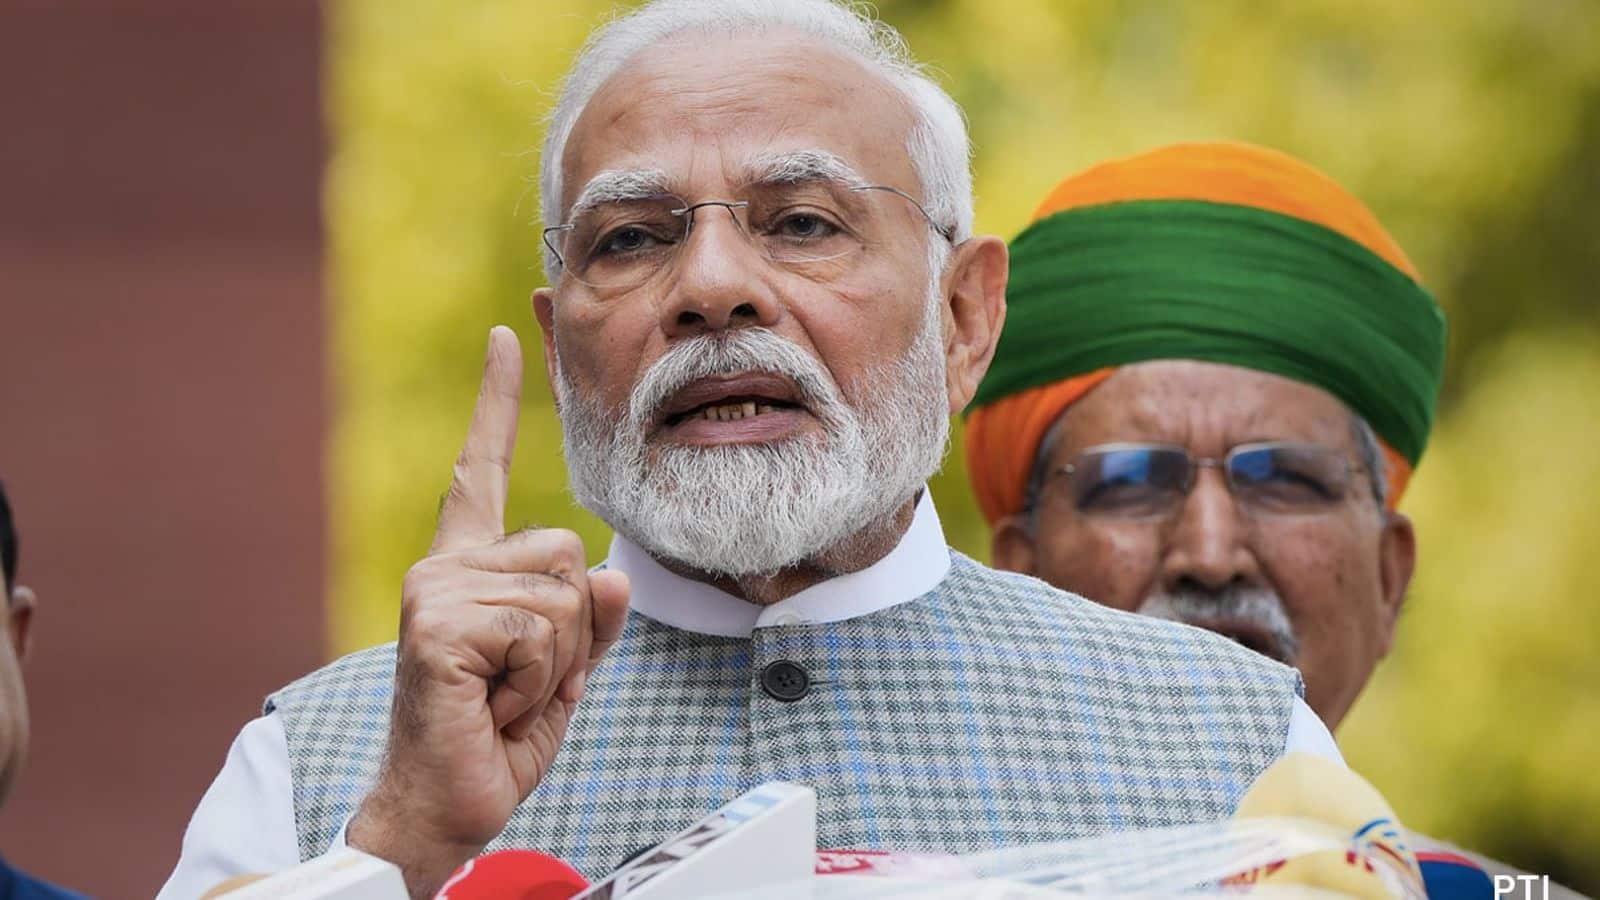 'Let's do our duty…': Modi's message to voters 